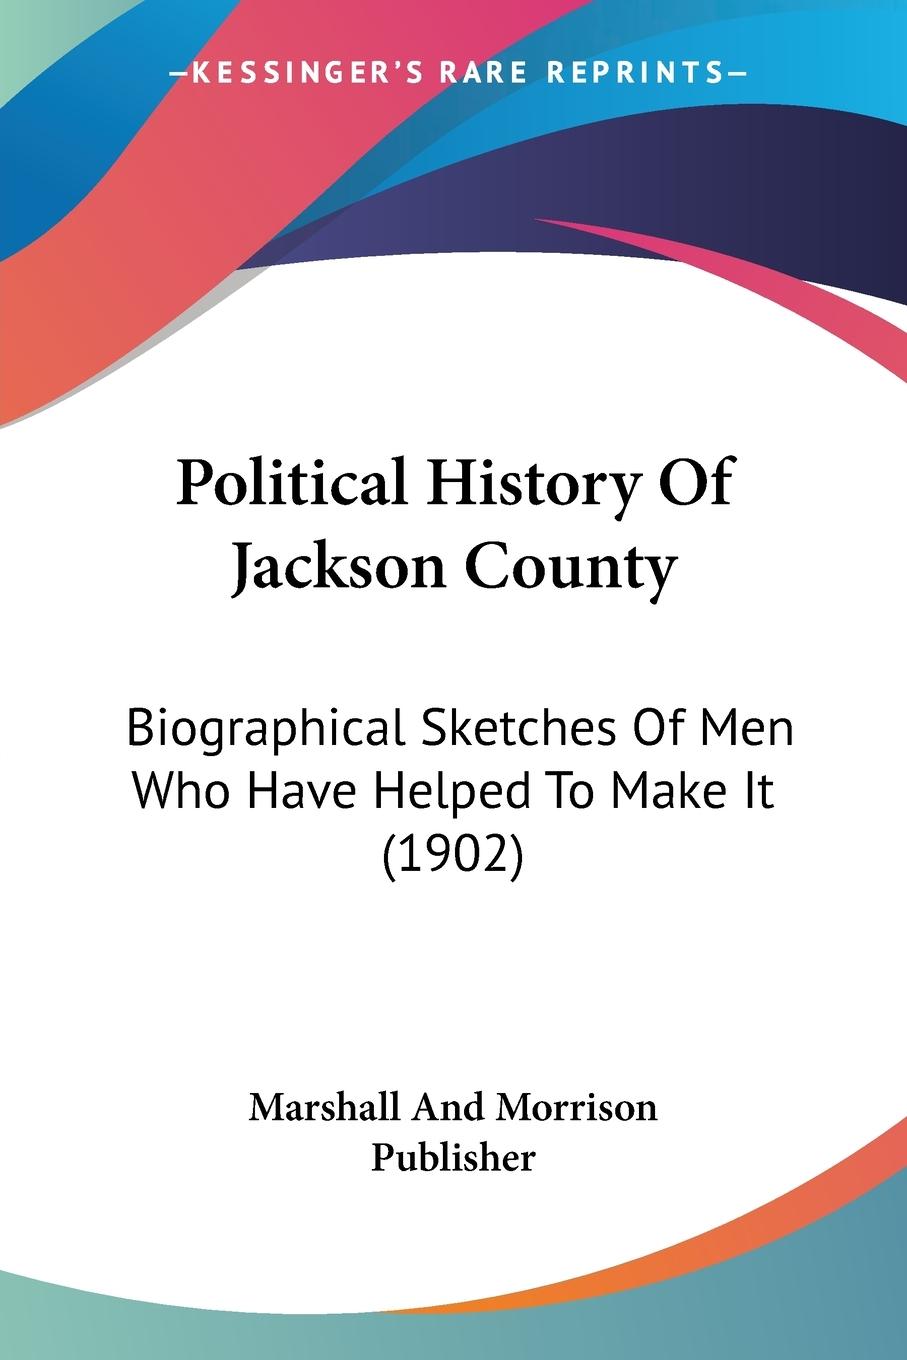 Political History Of Jackson County: Biographical Sketches Of Men Who Have Helped To Make It (1902)